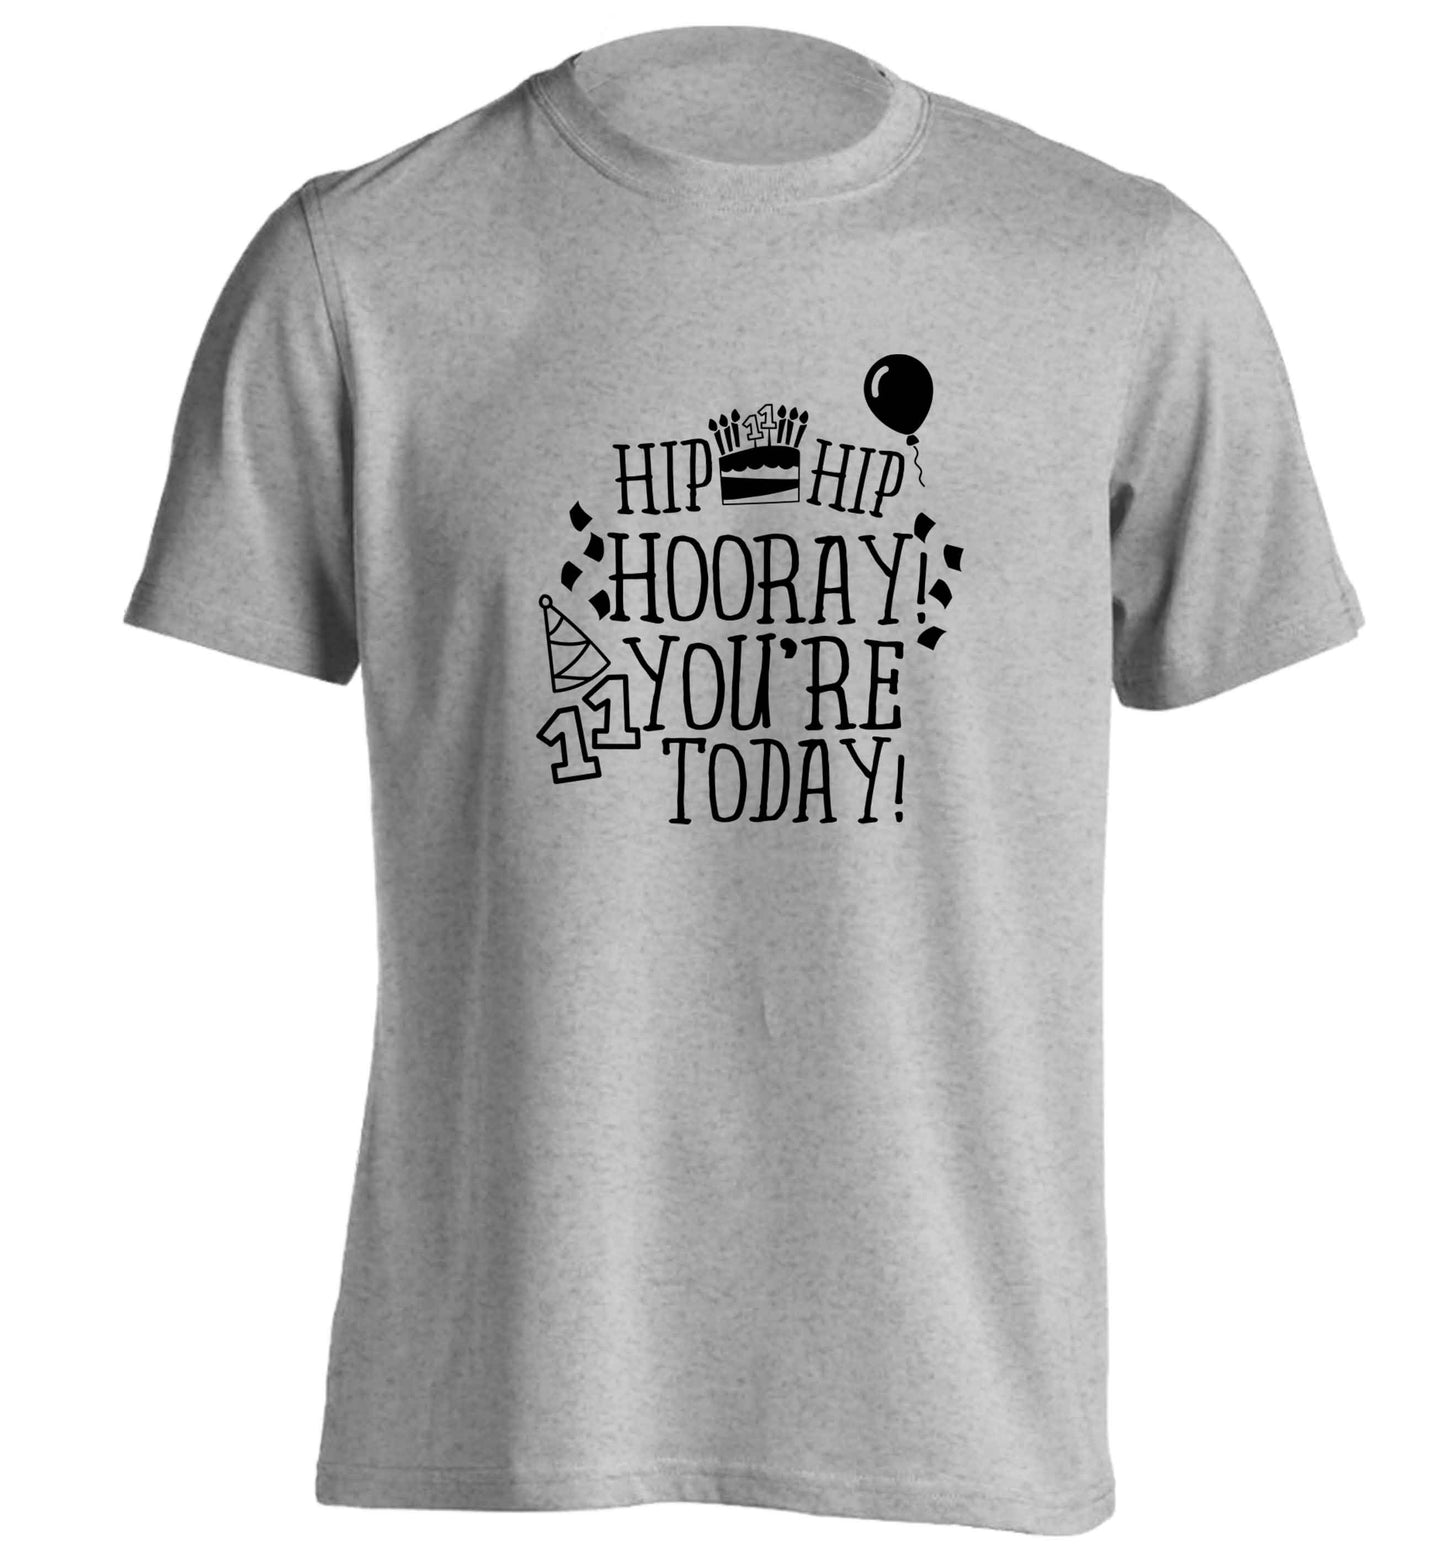 Hip hip hooray I you're eleven today! adults unisex grey Tshirt 2XL